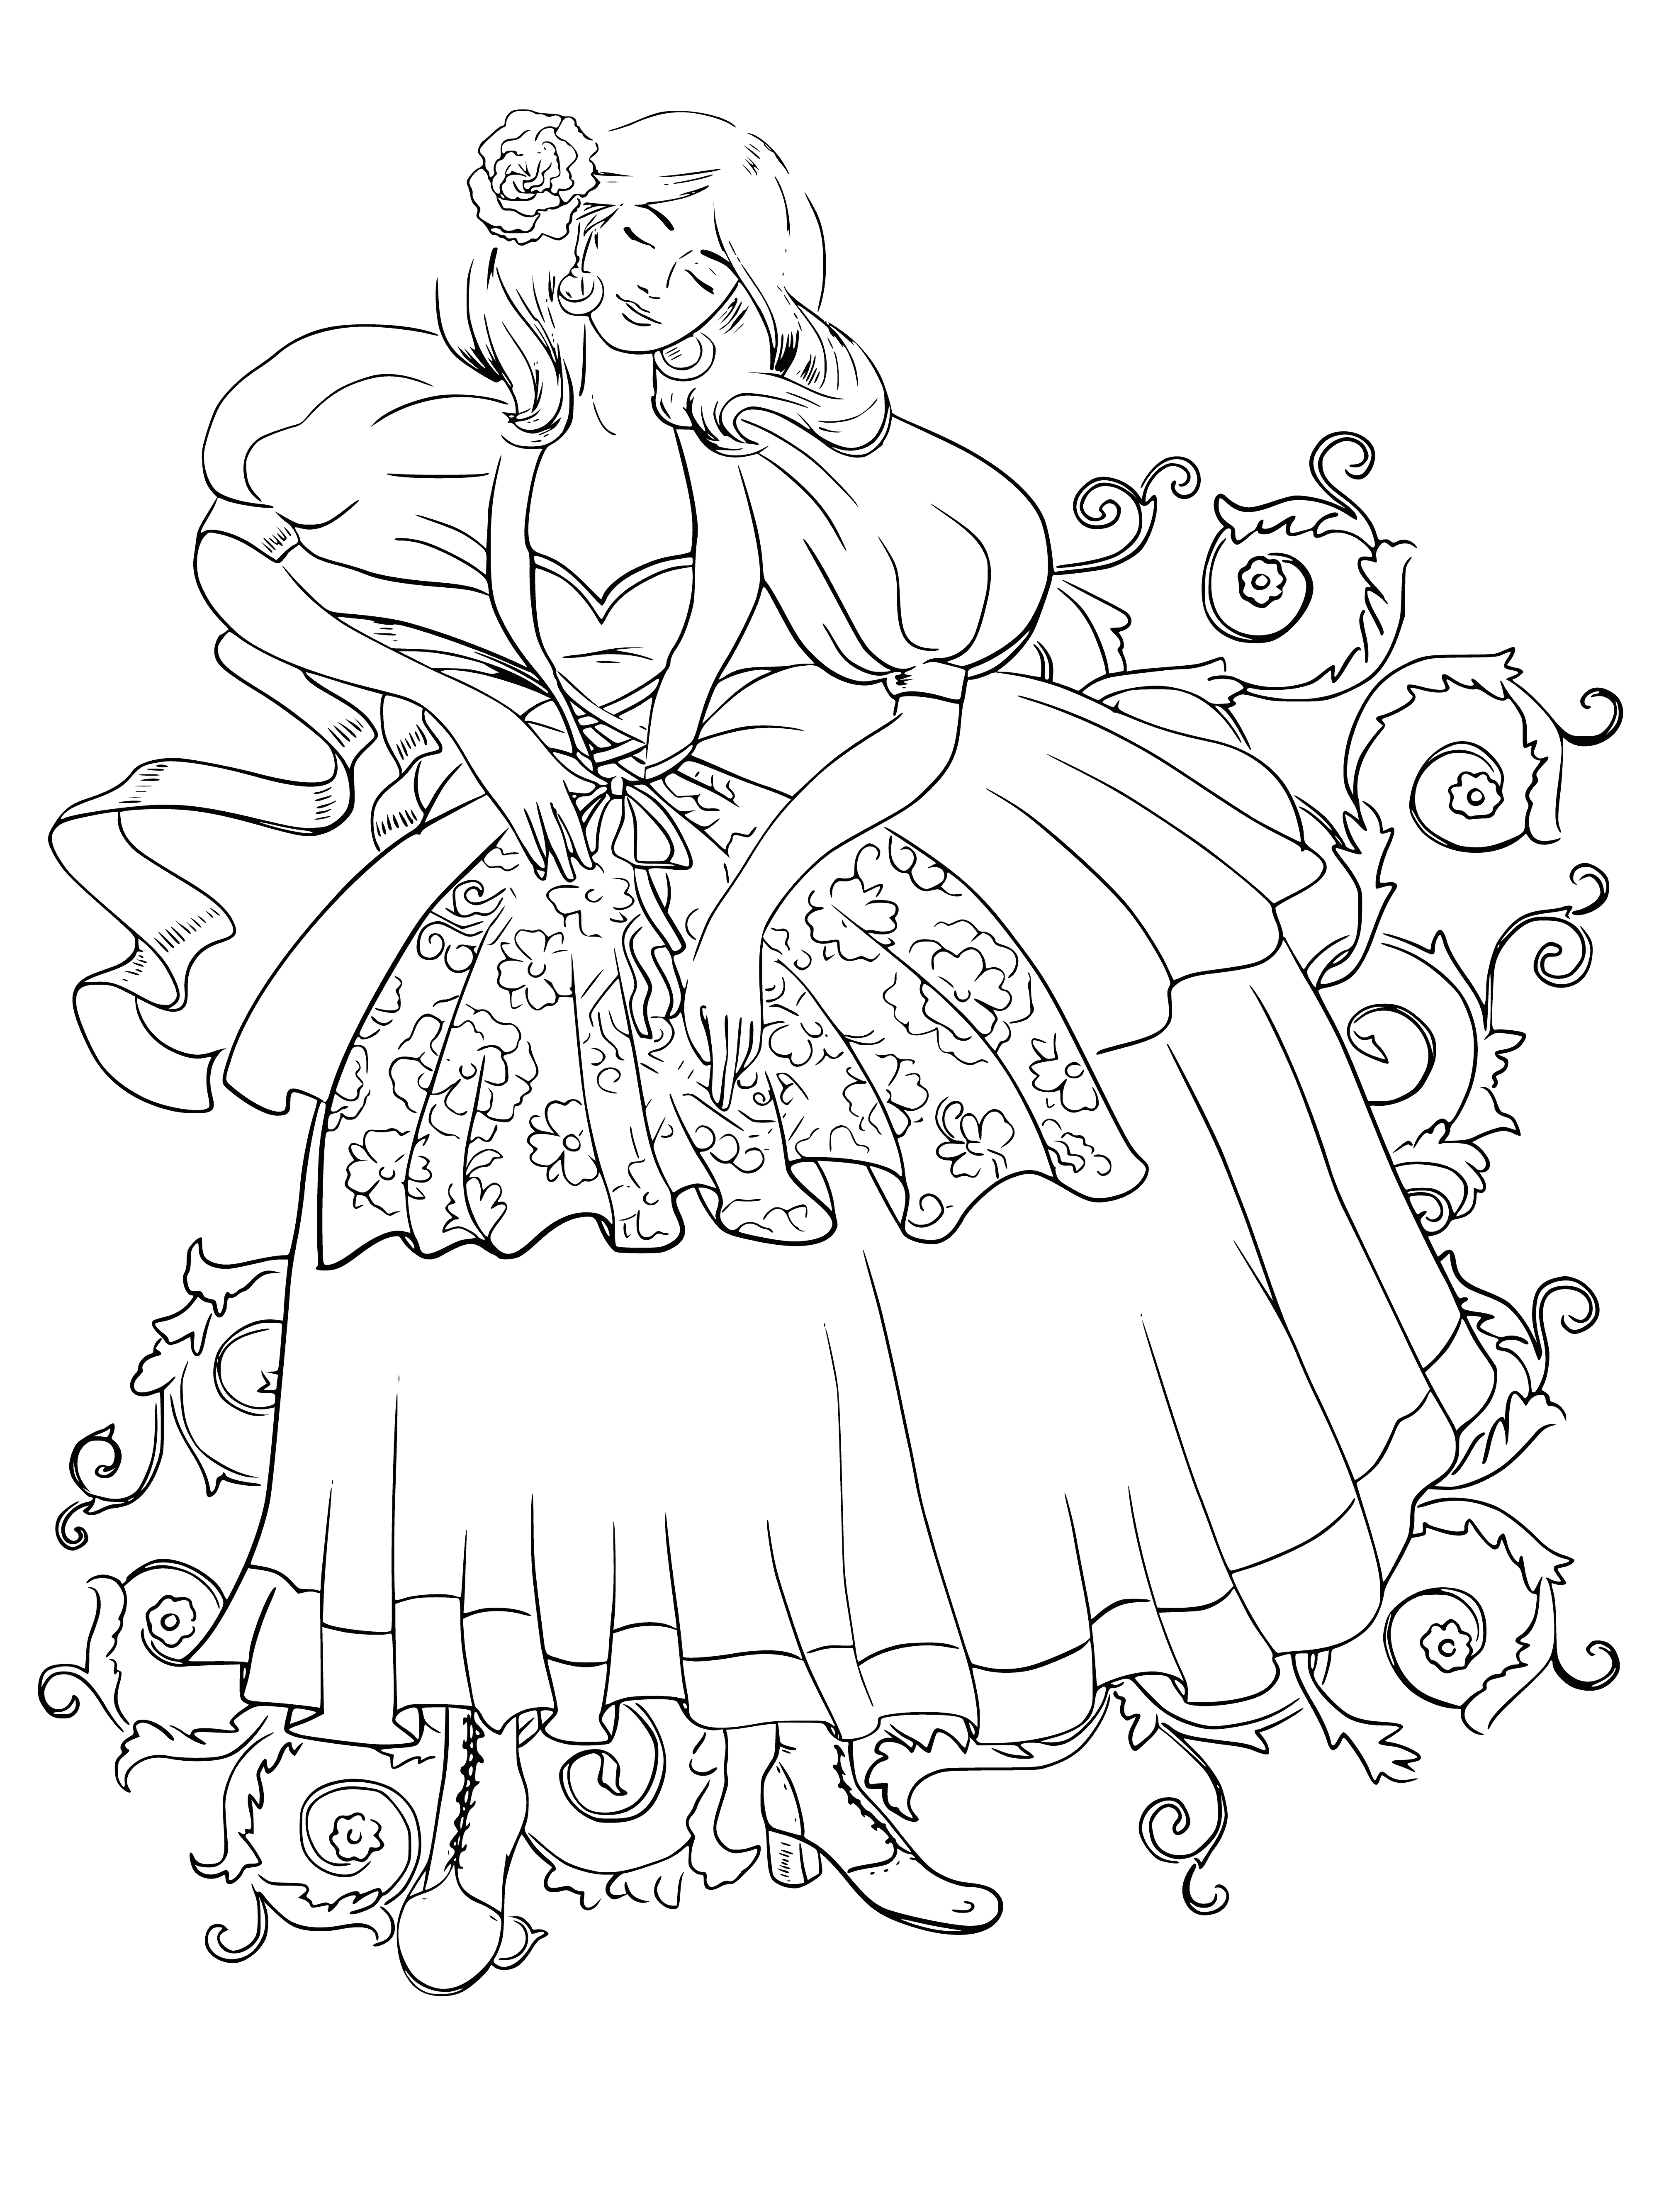 Fluffy dress coloring page